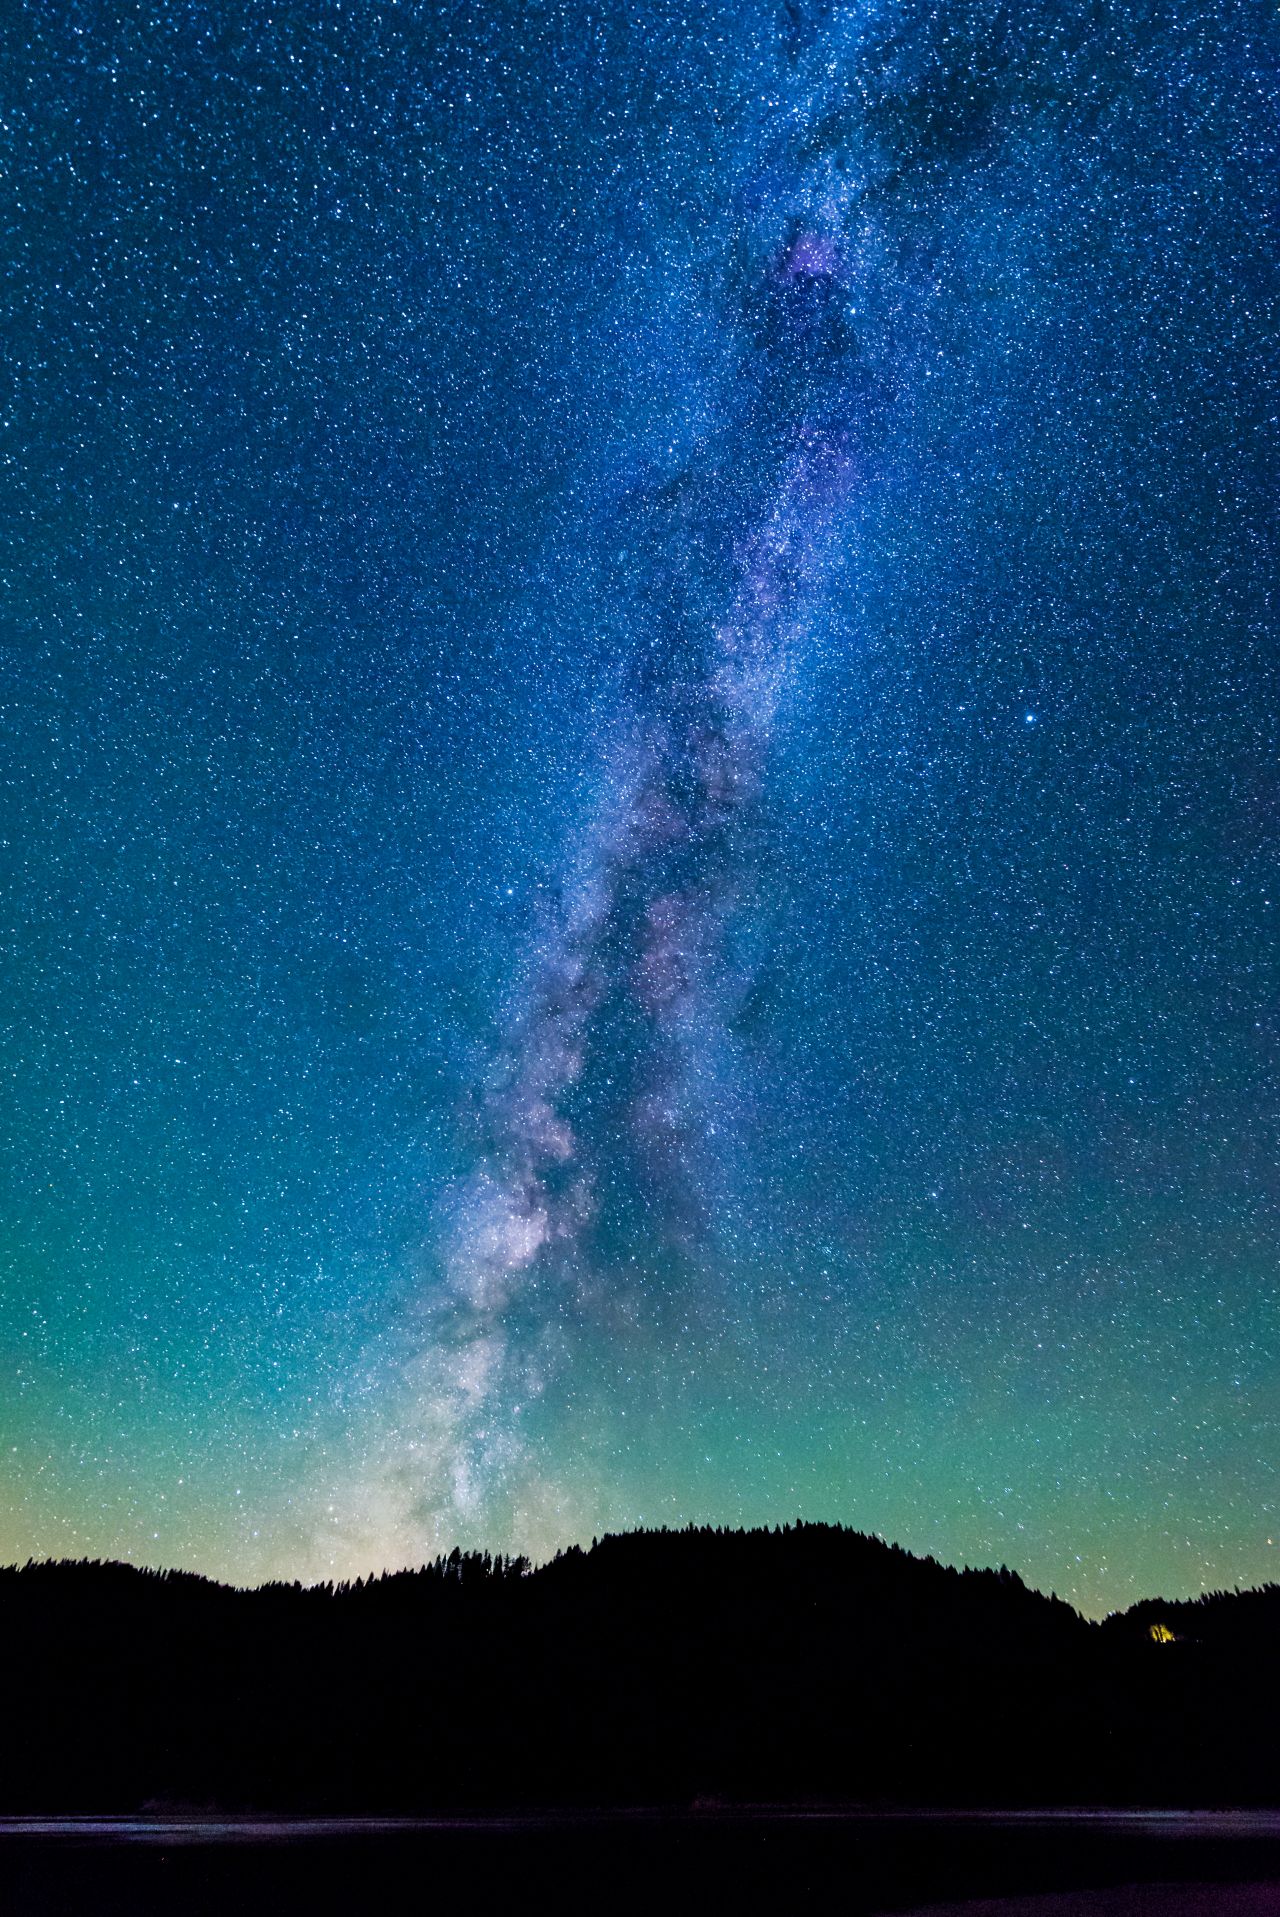 The milky way is shown shining in the night sky